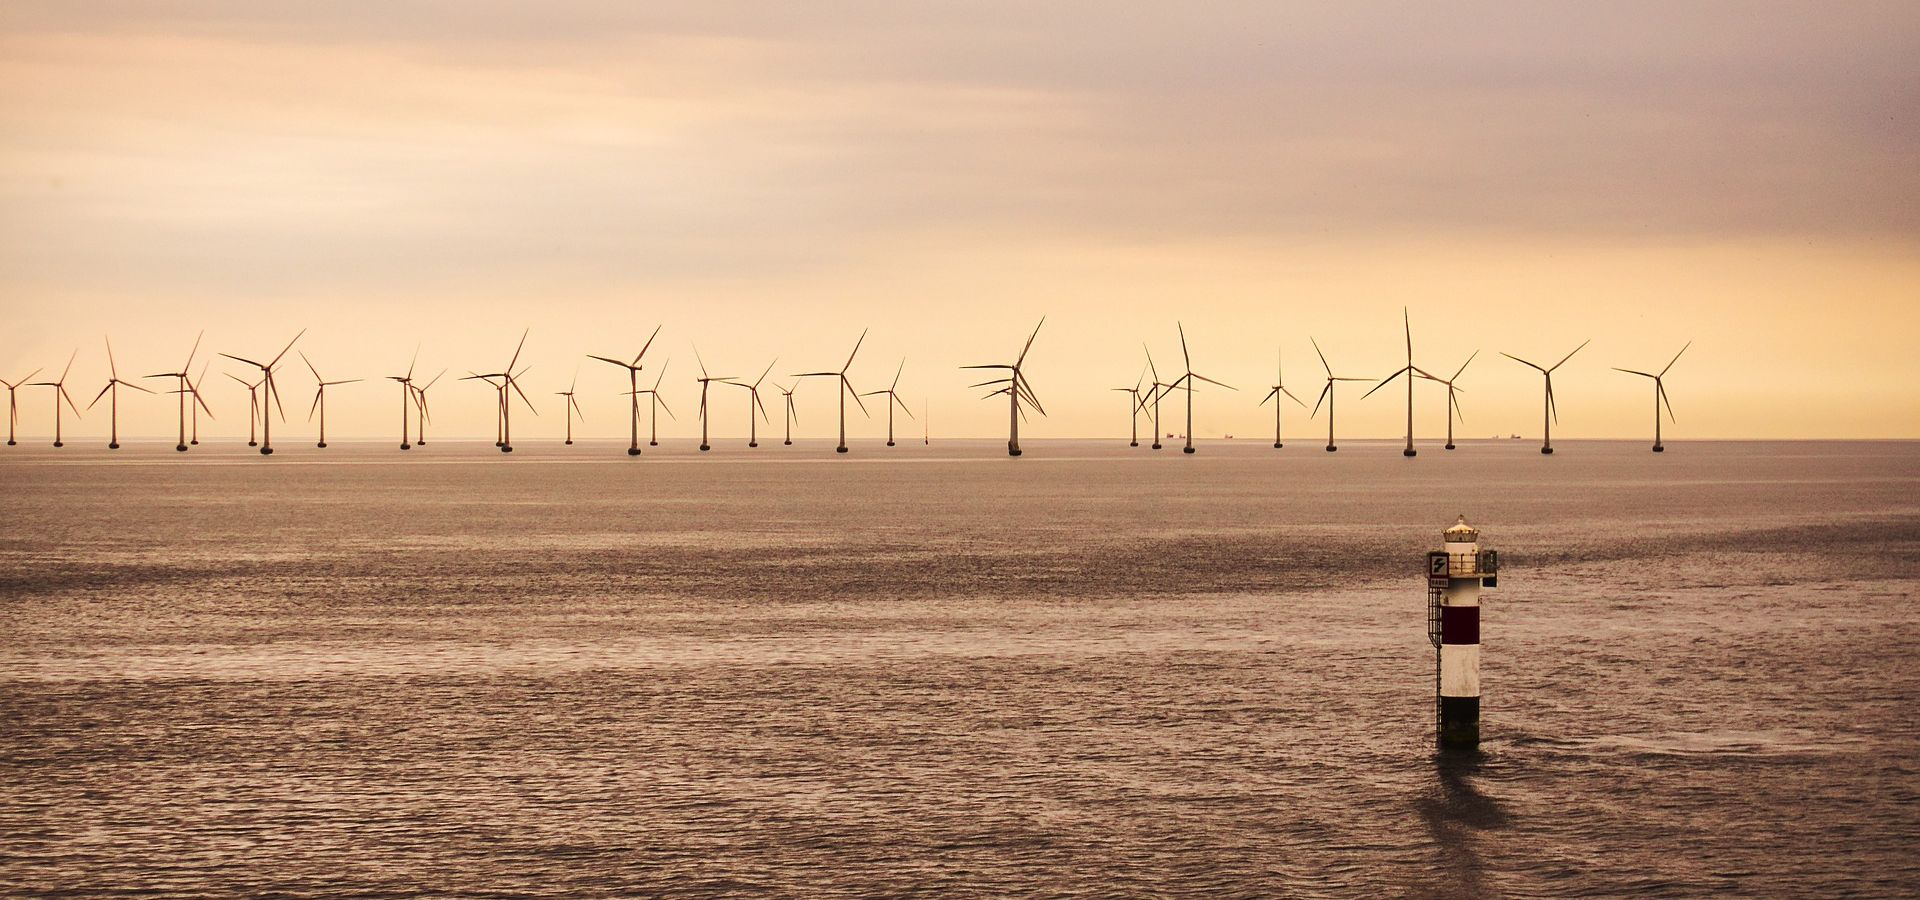 Offshore wind farms might be controlled by AI in future